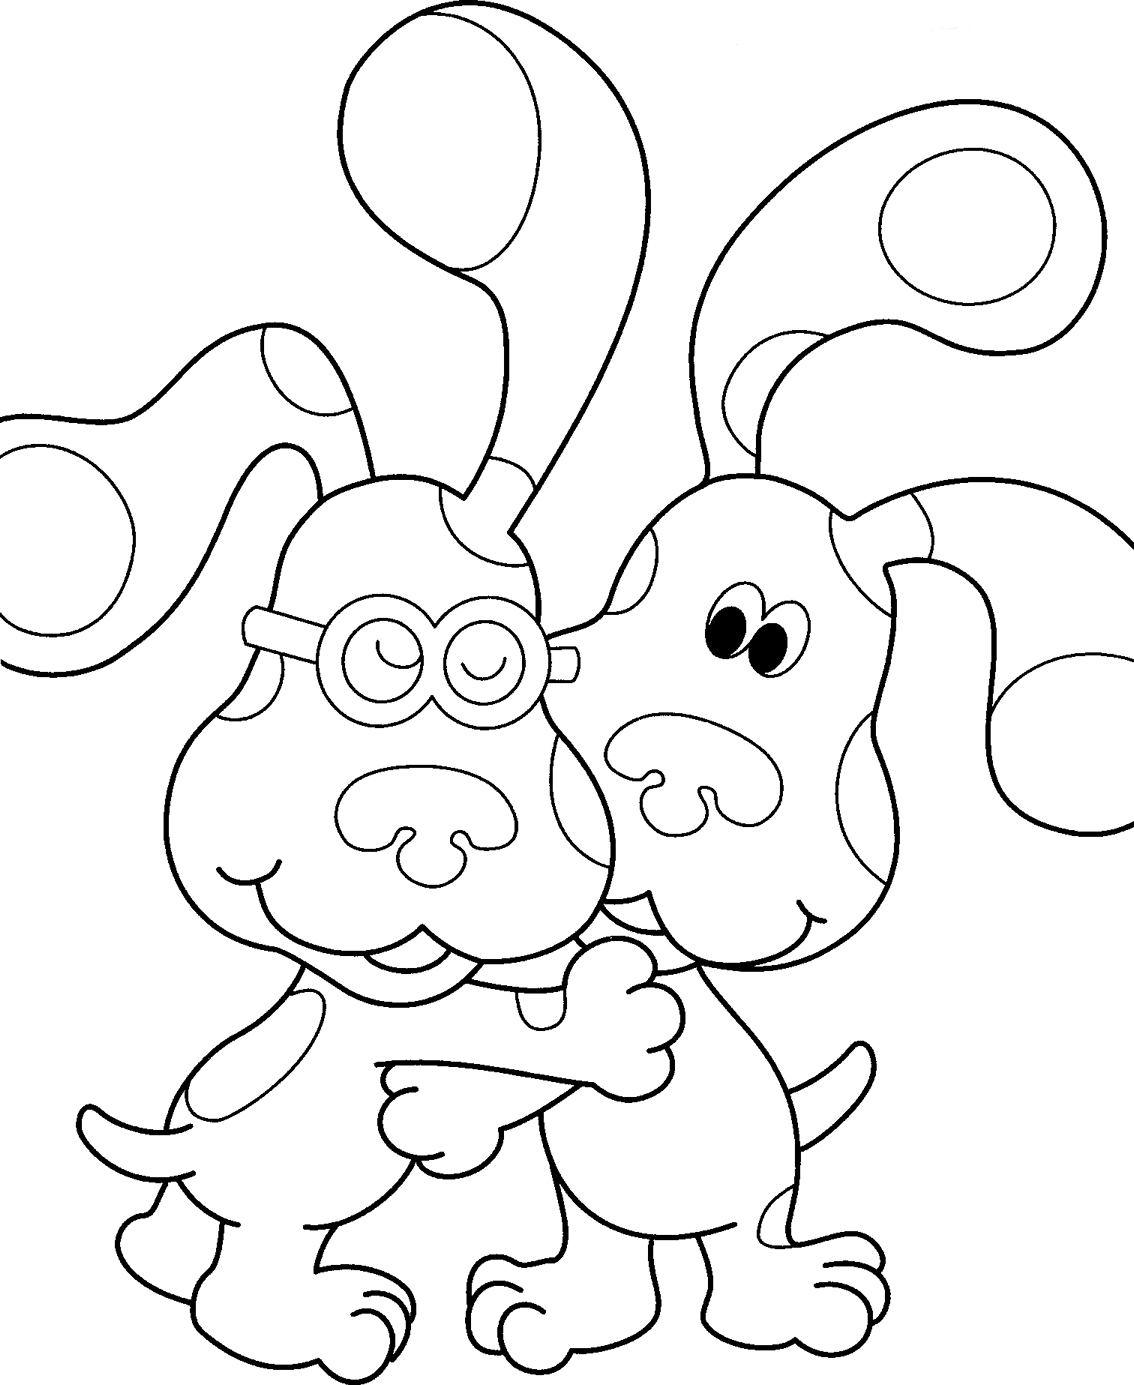 Printable Blues Clues Coloring Pages - Printable Blues Clues Coloring Pages